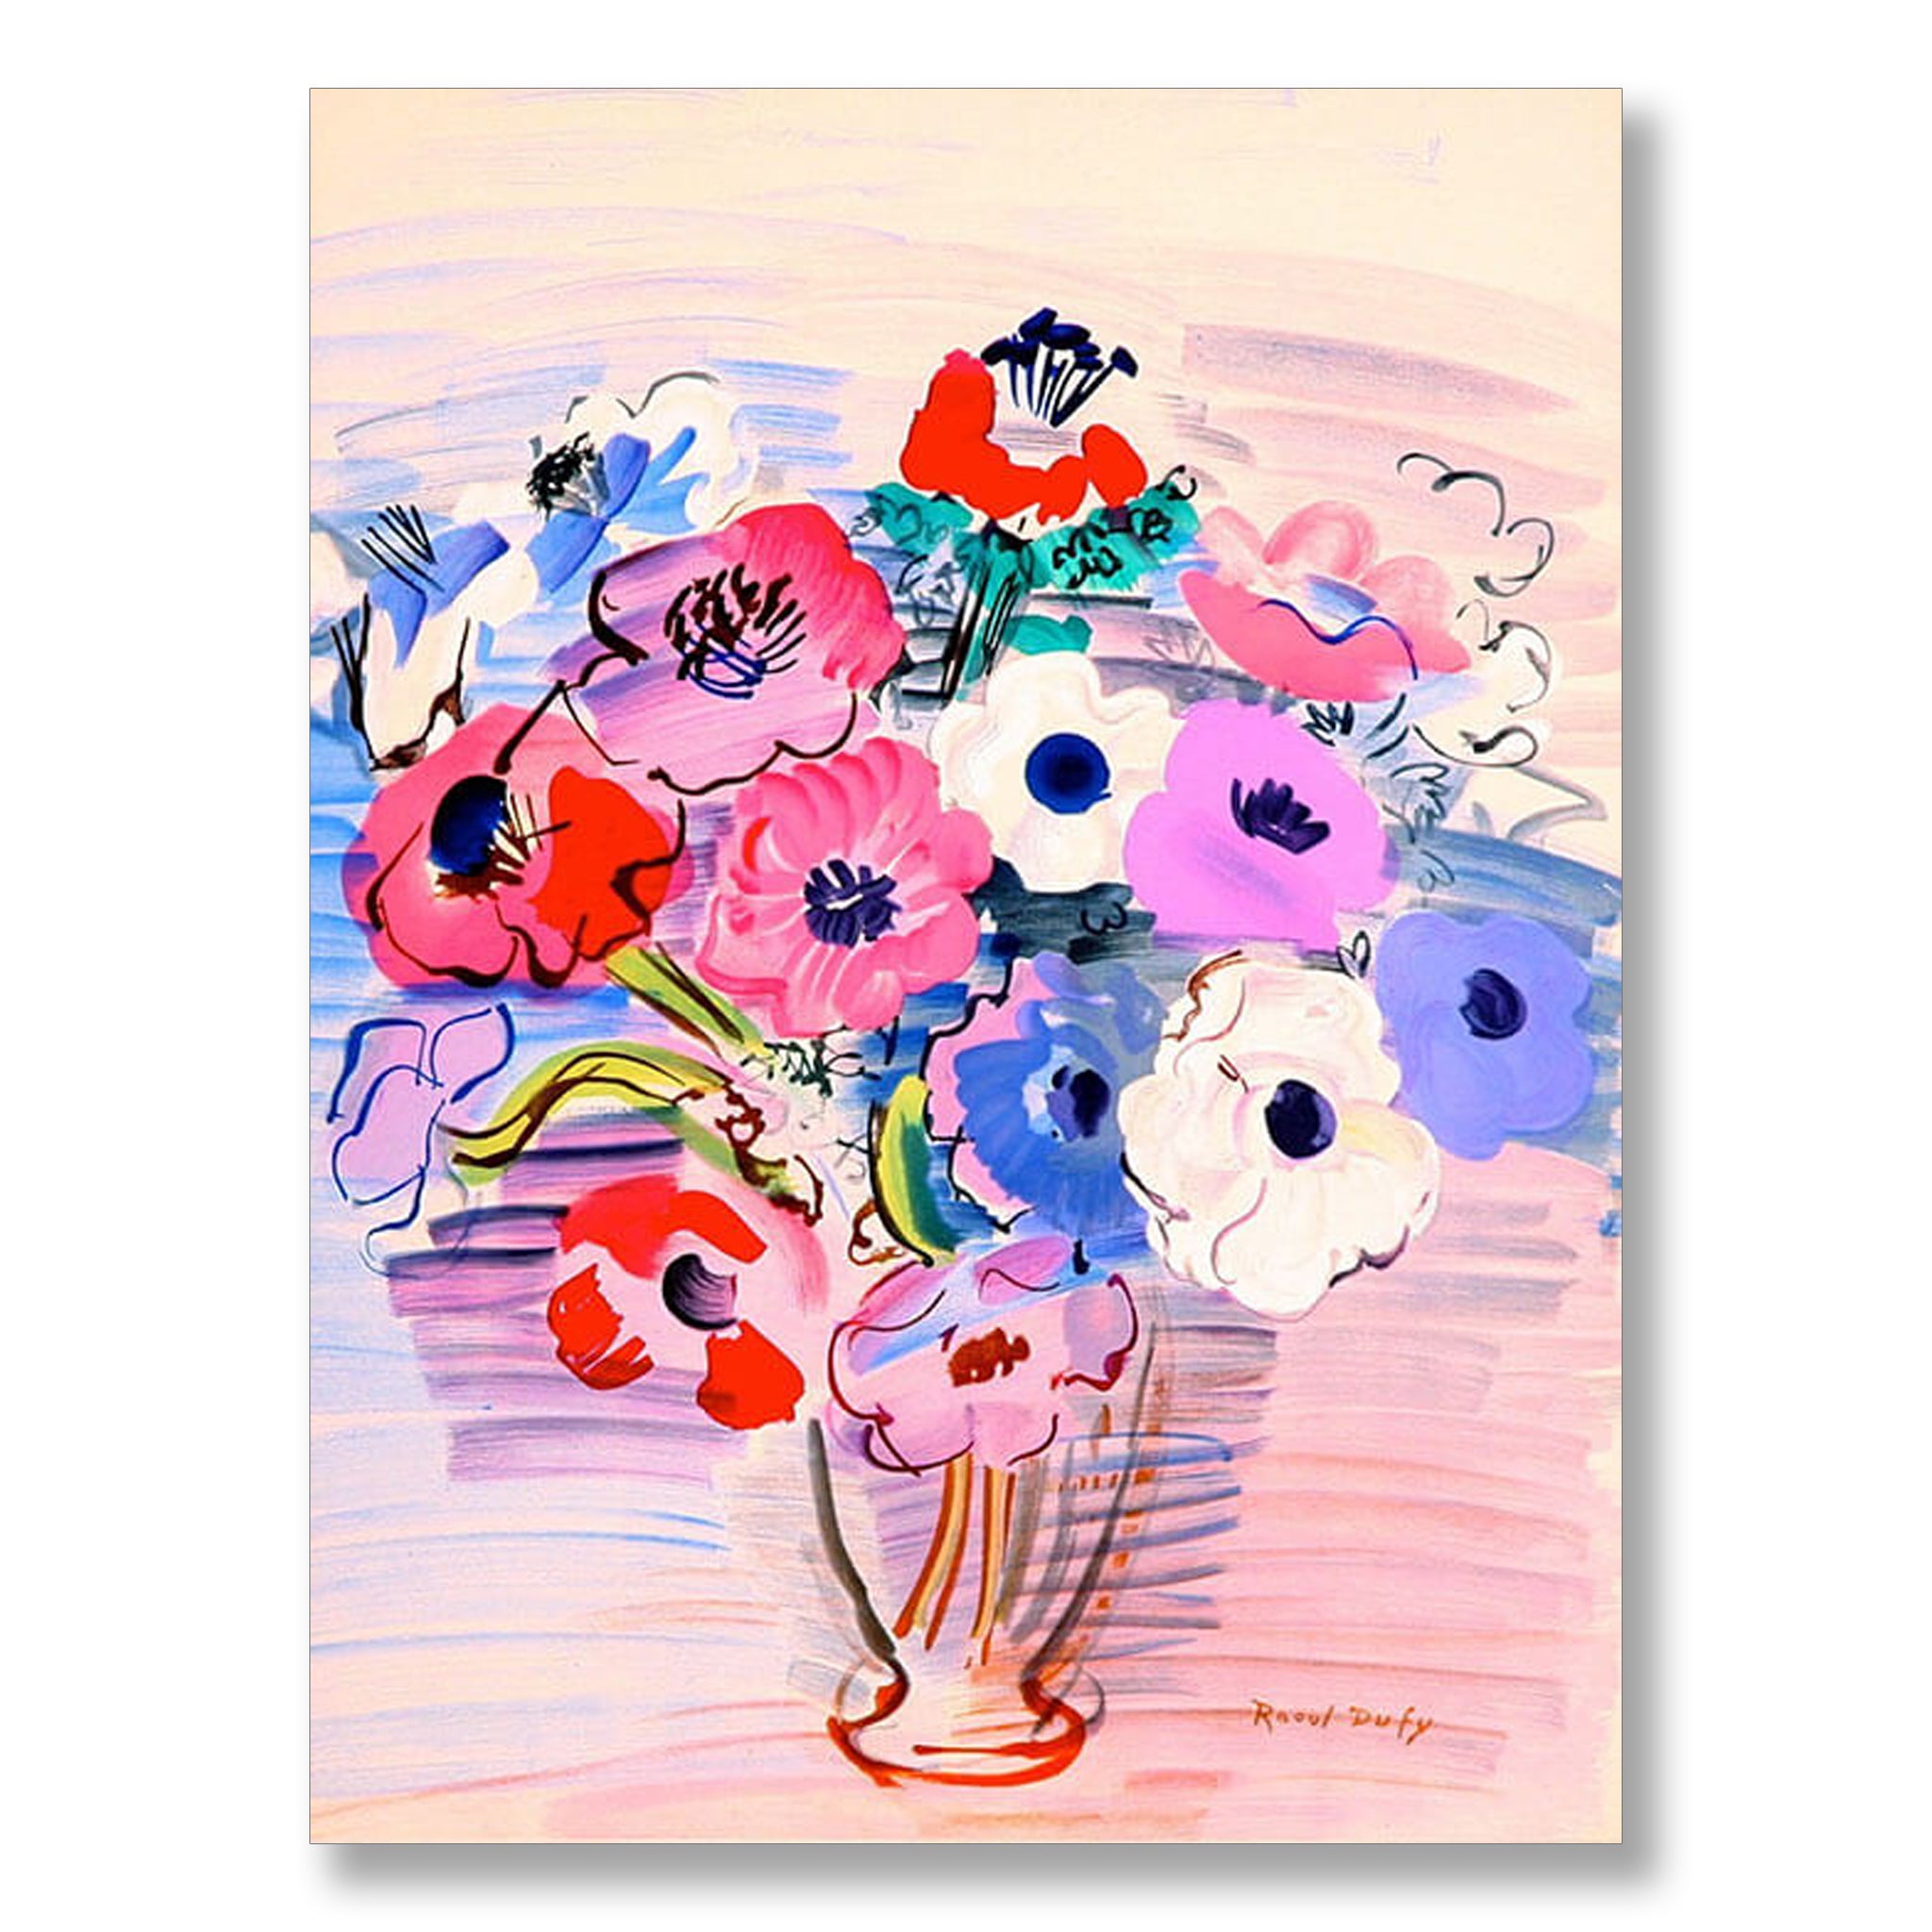 Bouquet of Anemones 1948 by Raoul Dufy